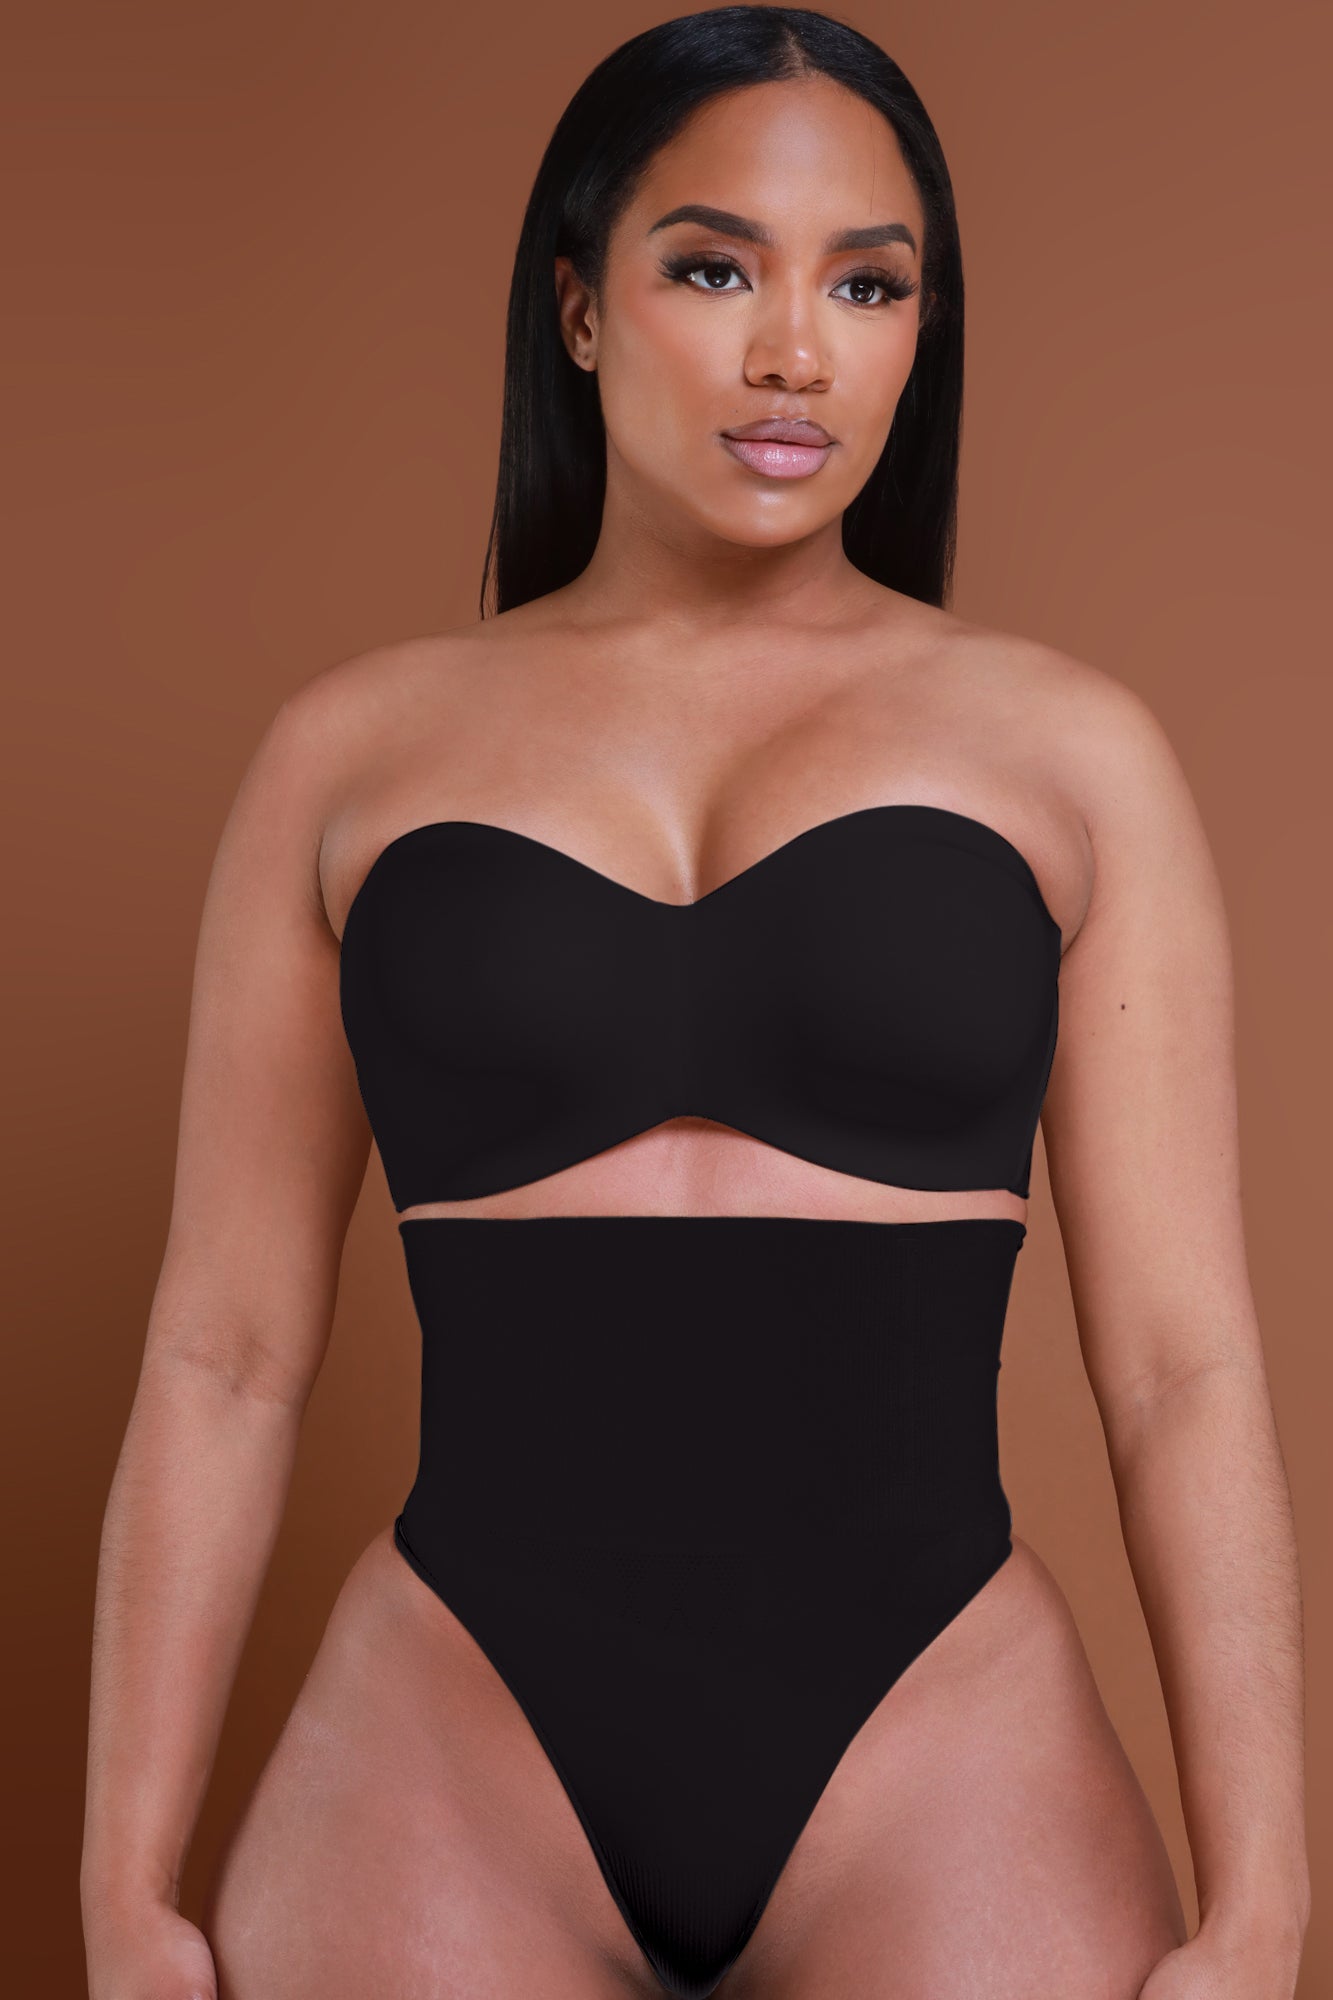 How Do I Get My Stomach Flat - Fast? Top 5 Shapewear For Tummy Control –  The Magic Knicker Shop